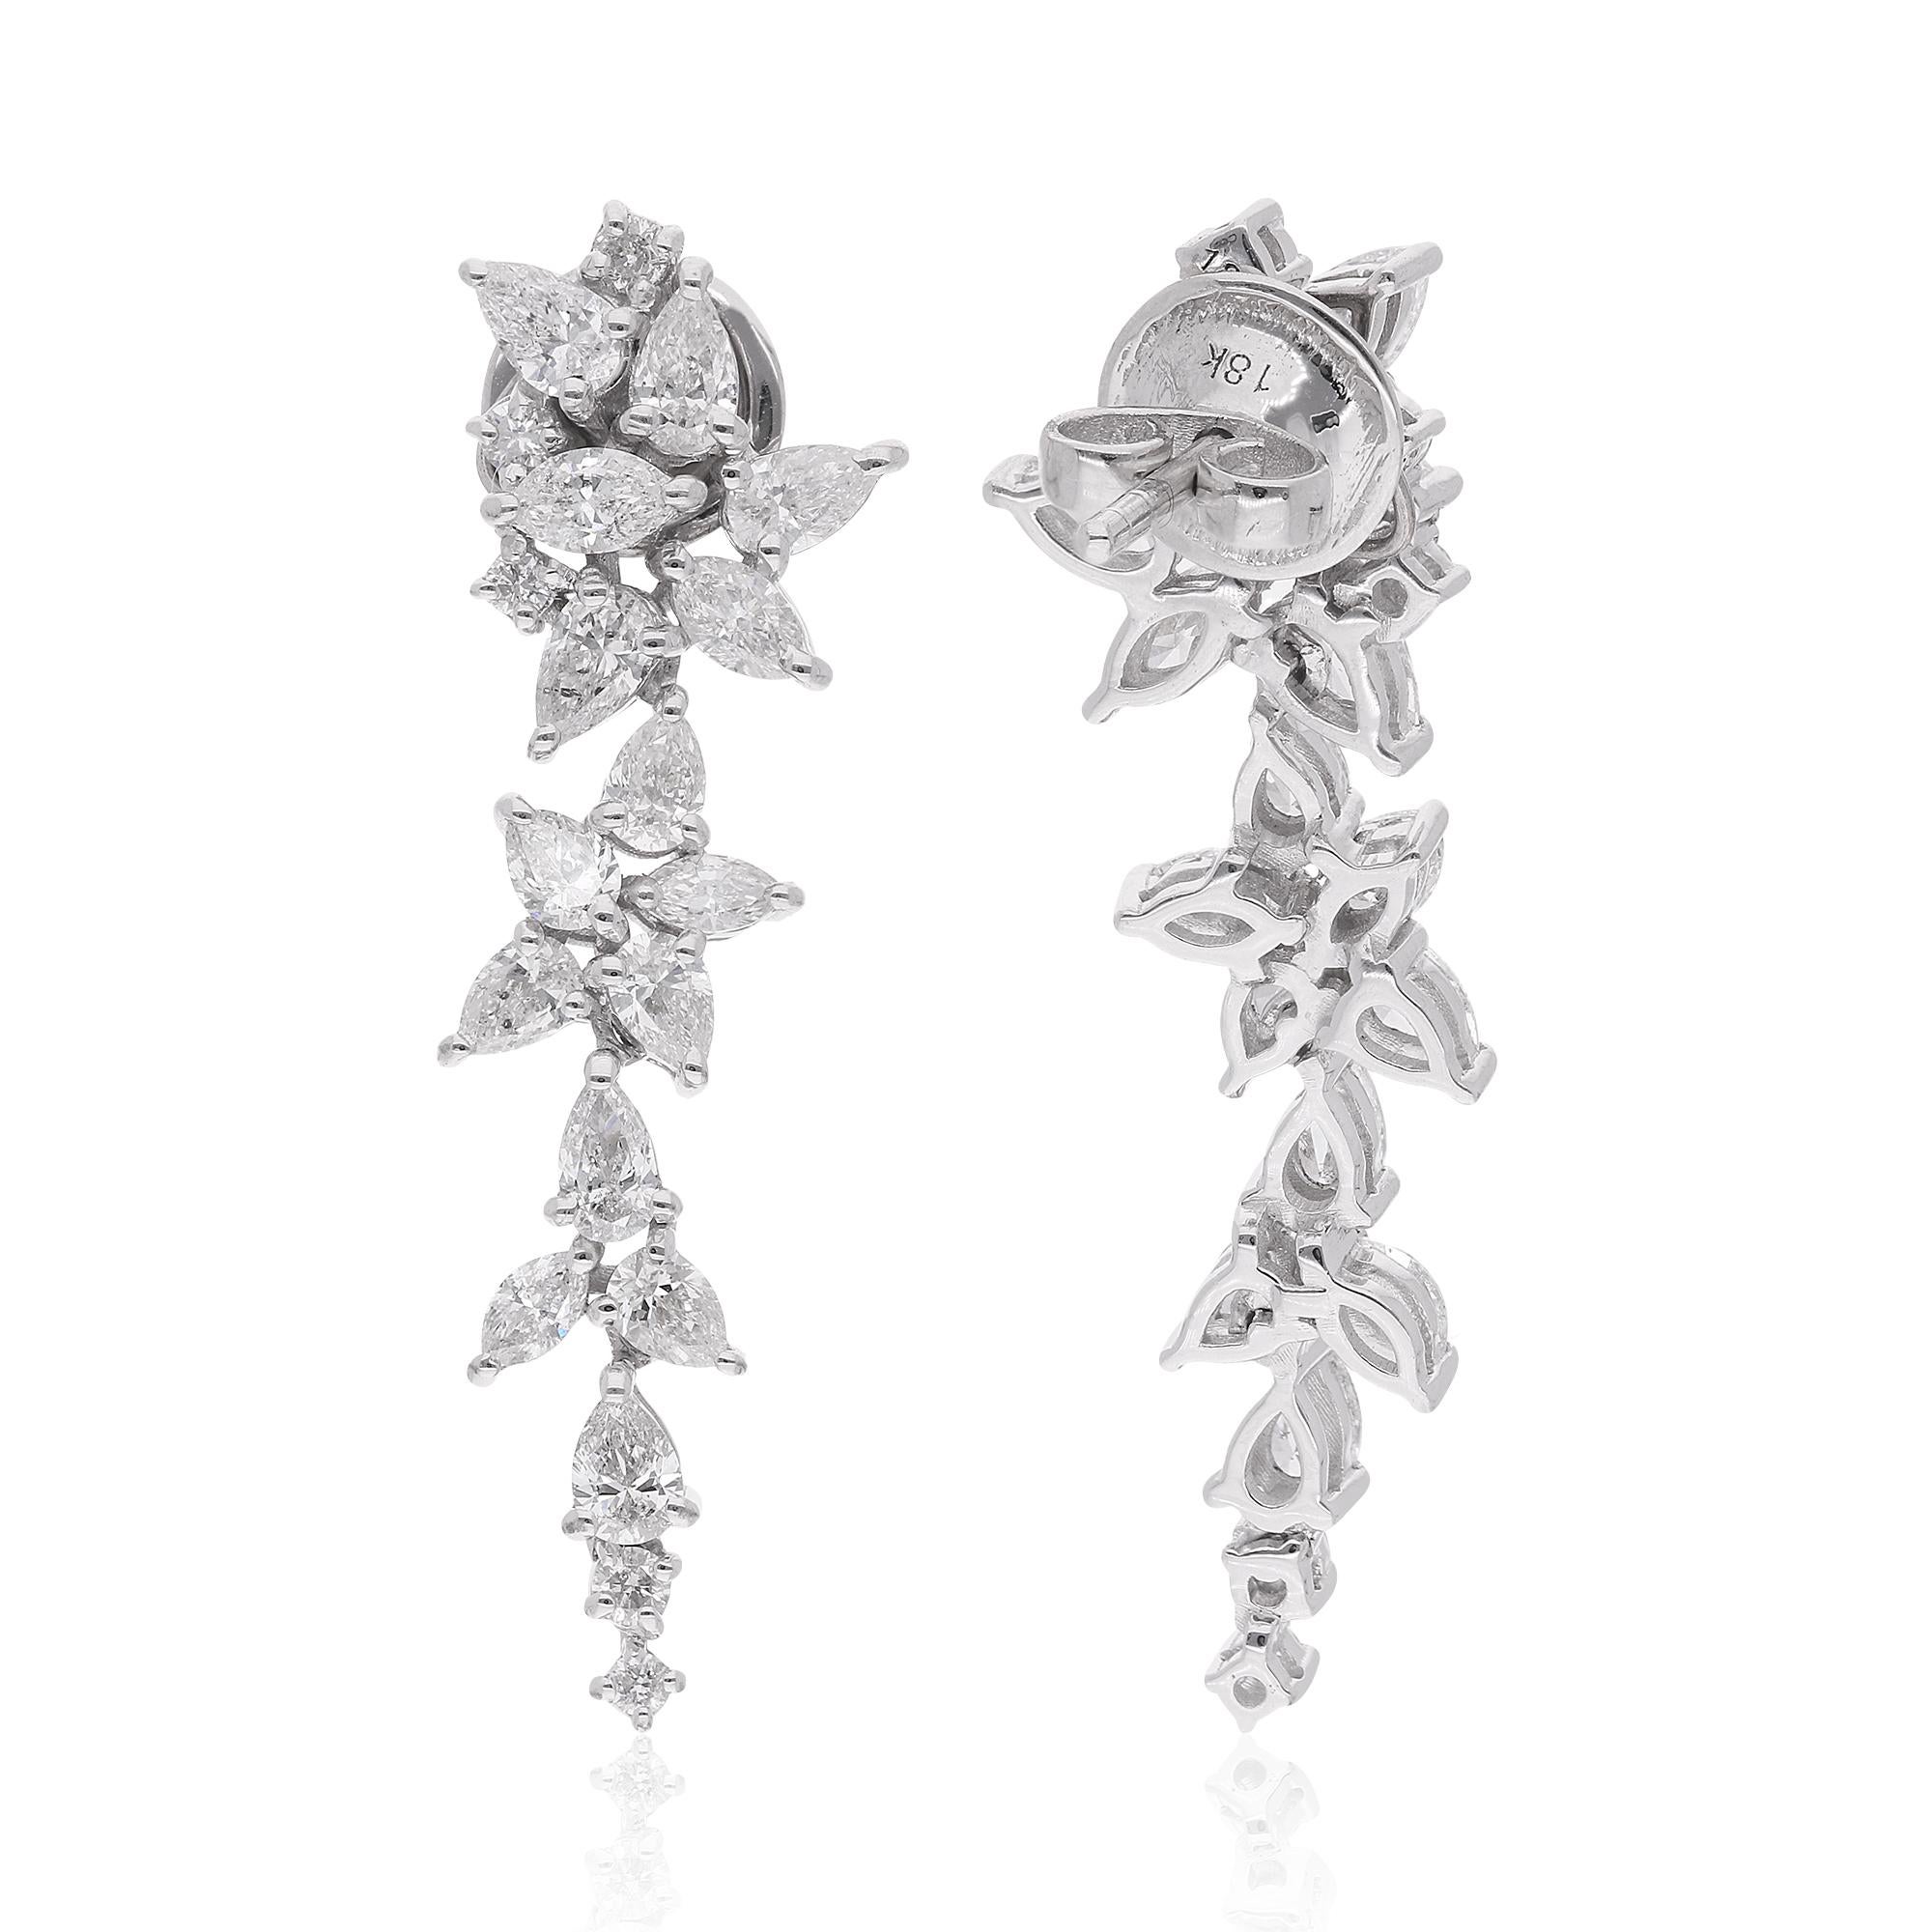 Elevate your ensemble to new heights with these breathtaking round, pear, and marquise diamond earrings, crafted with meticulous care in 14 karat white gold. Each earring features a stunning combination of natural diamonds totaling an impressive